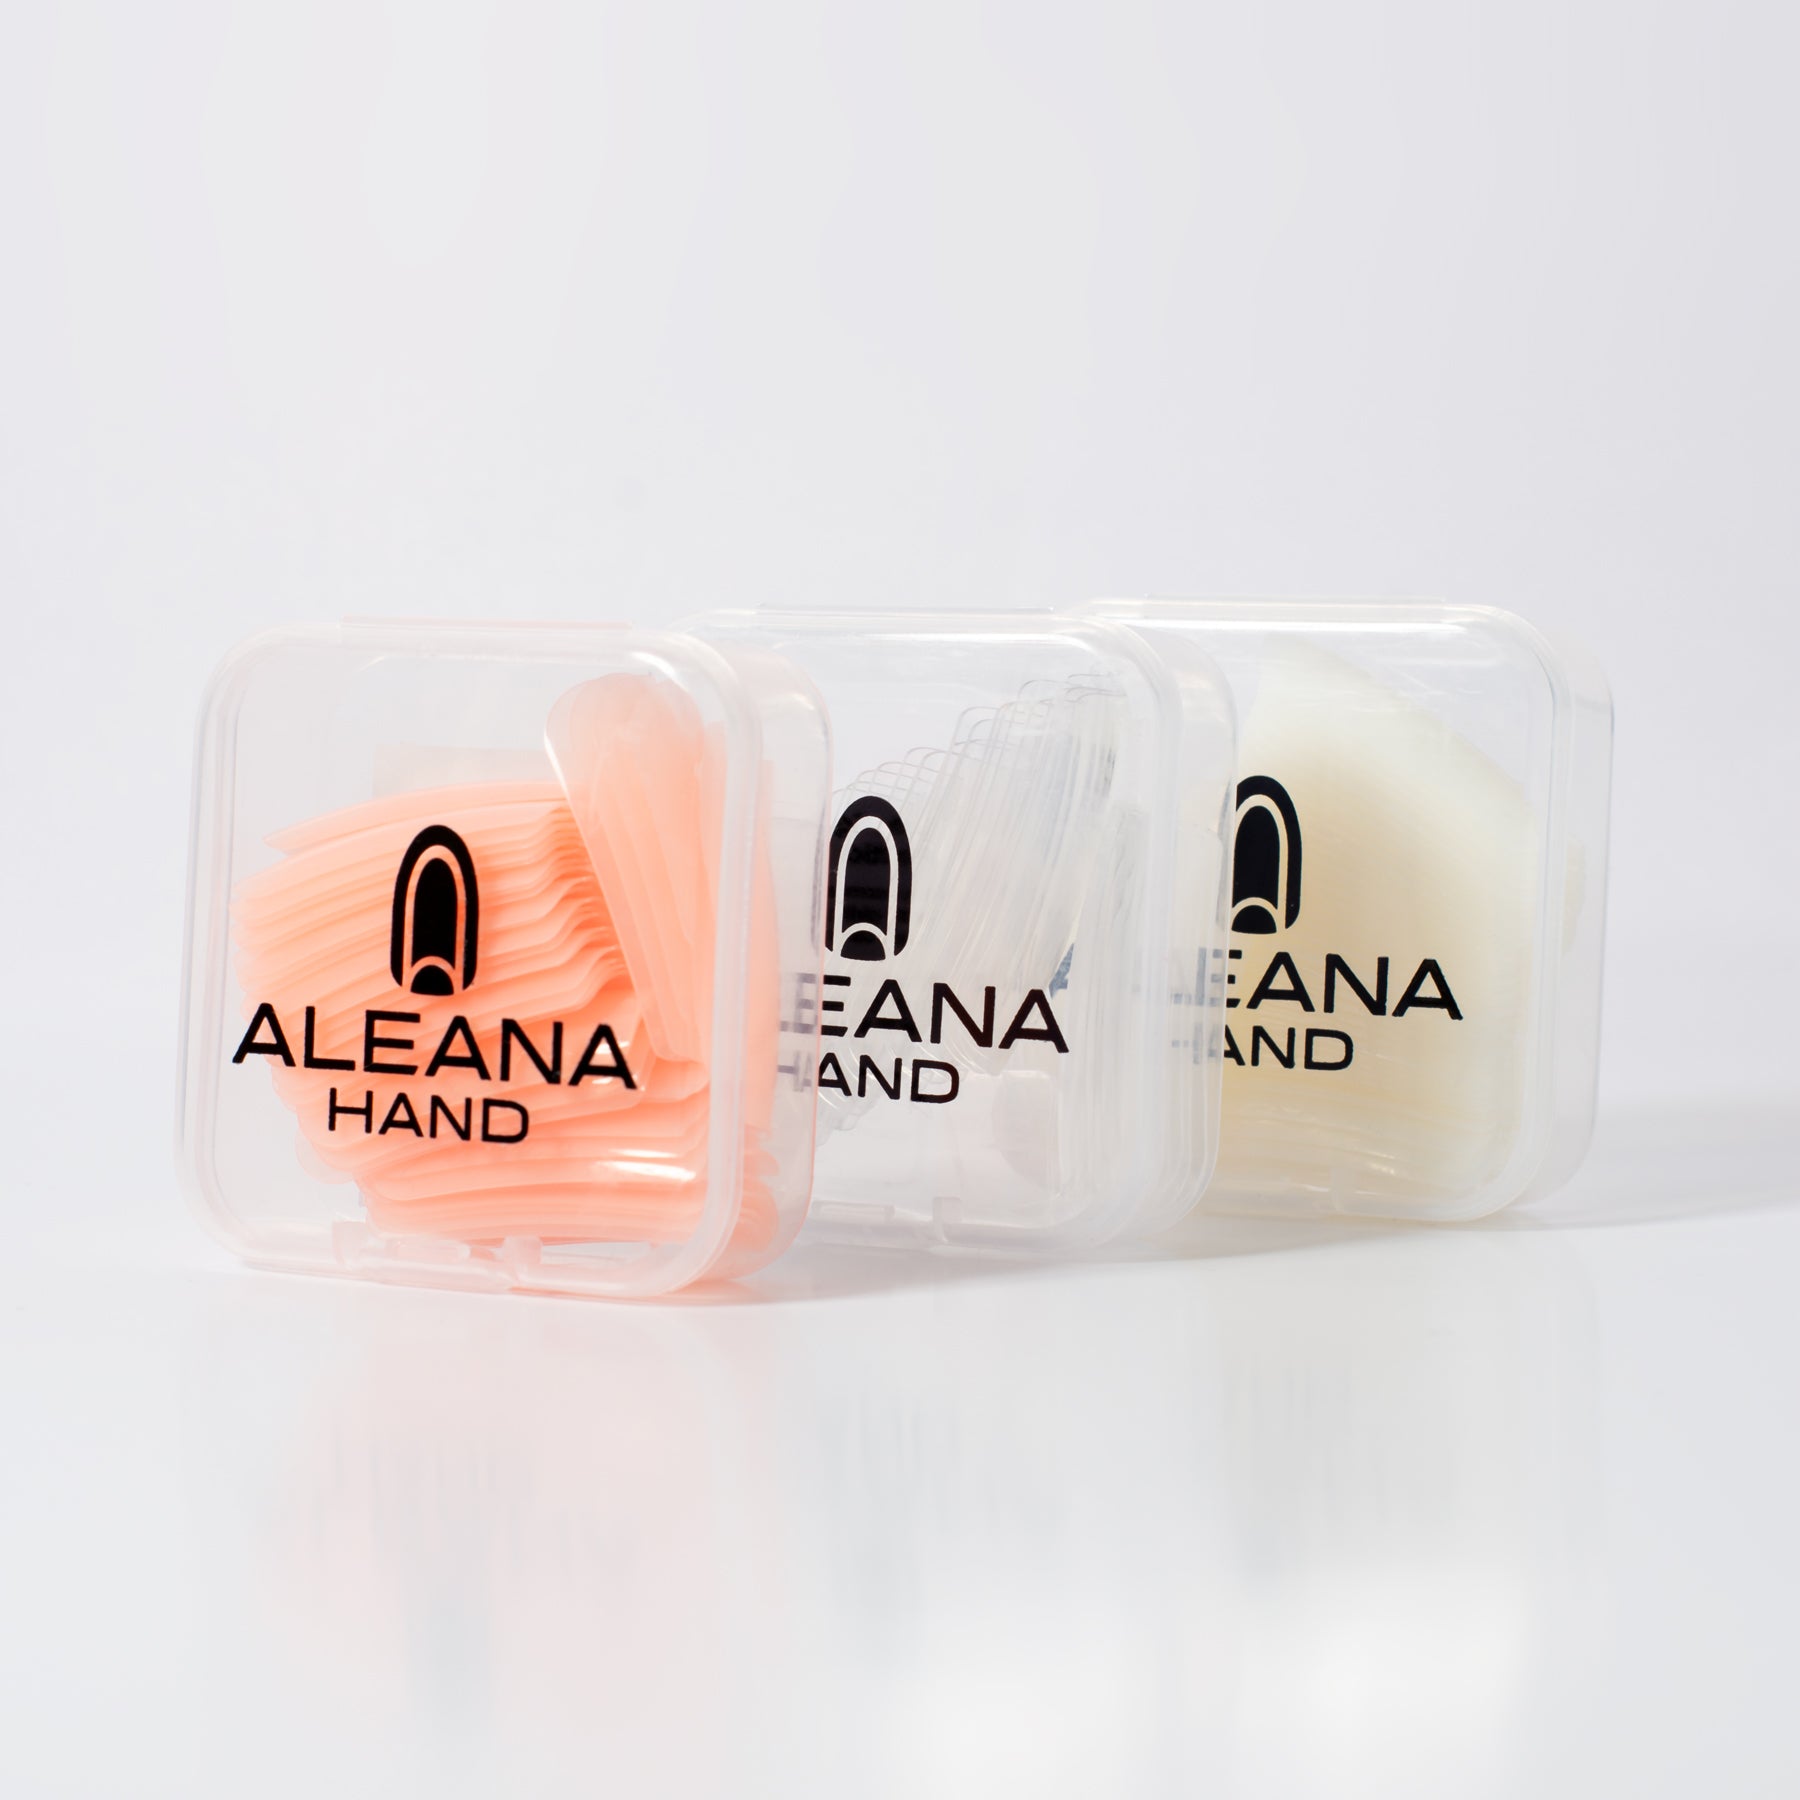 NEW Packaging! Basic Nail Tips for Aleana Practice Fingers